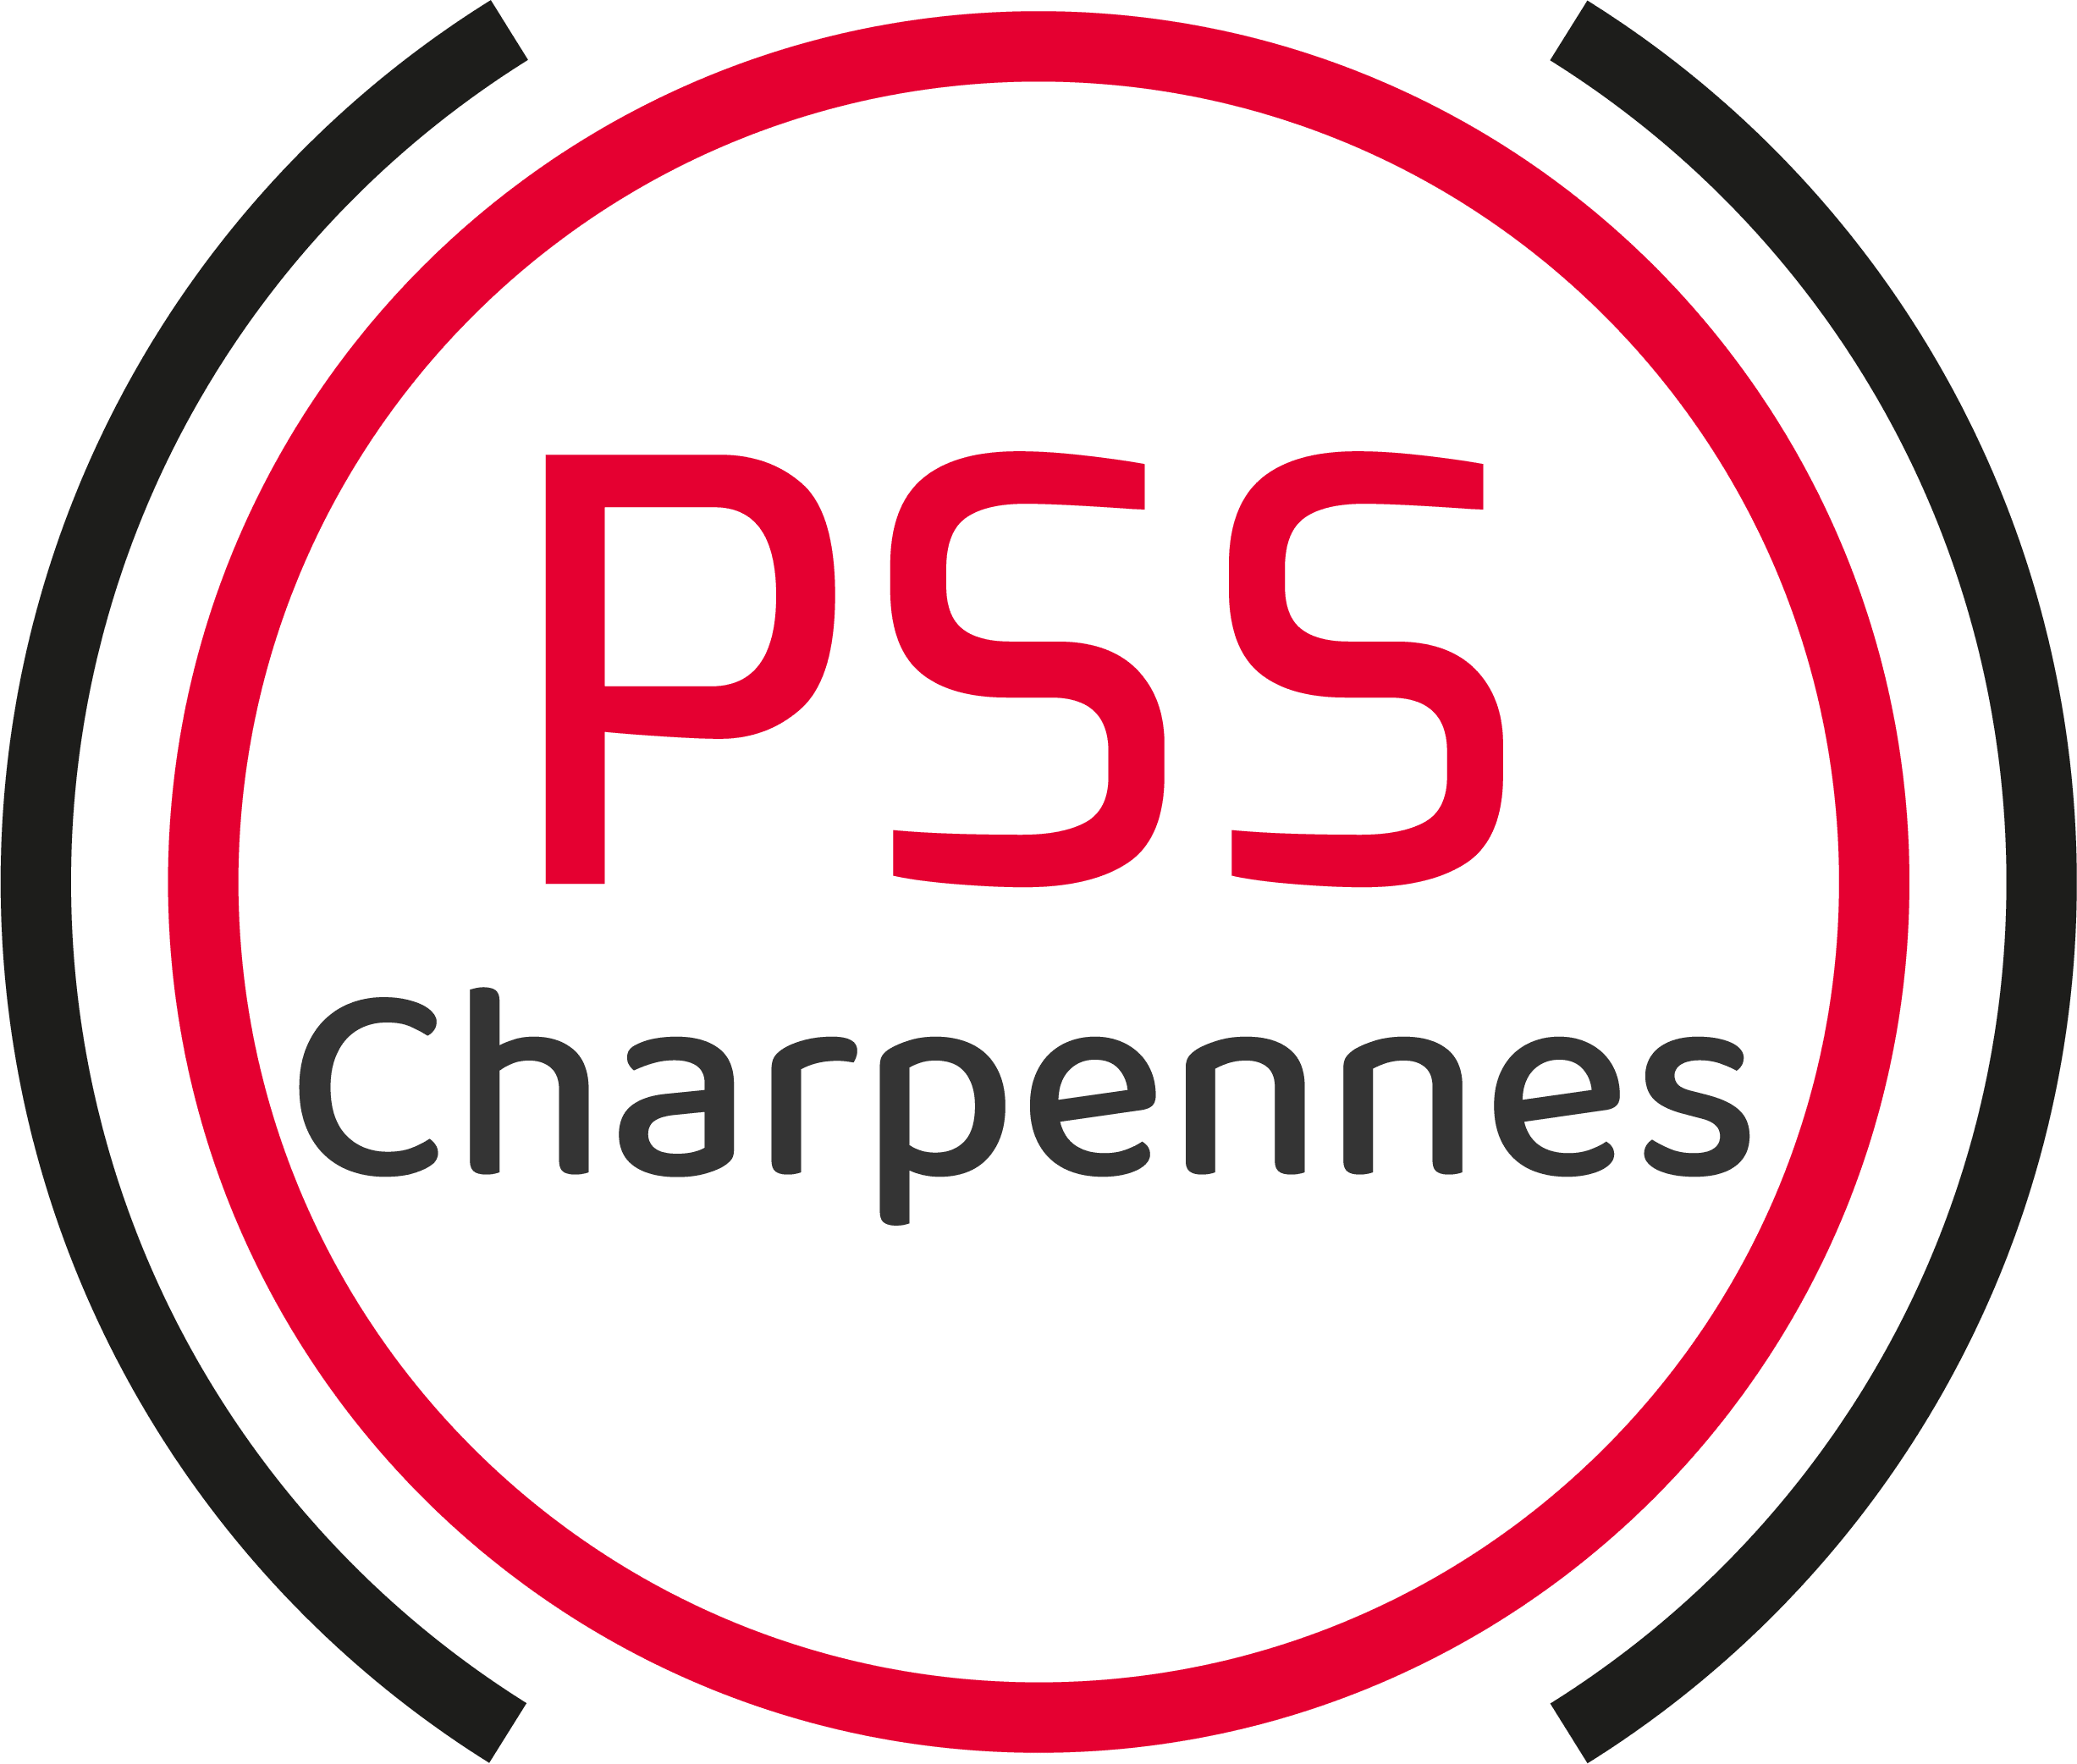 Auto-Ecole PSS CHARPENNES